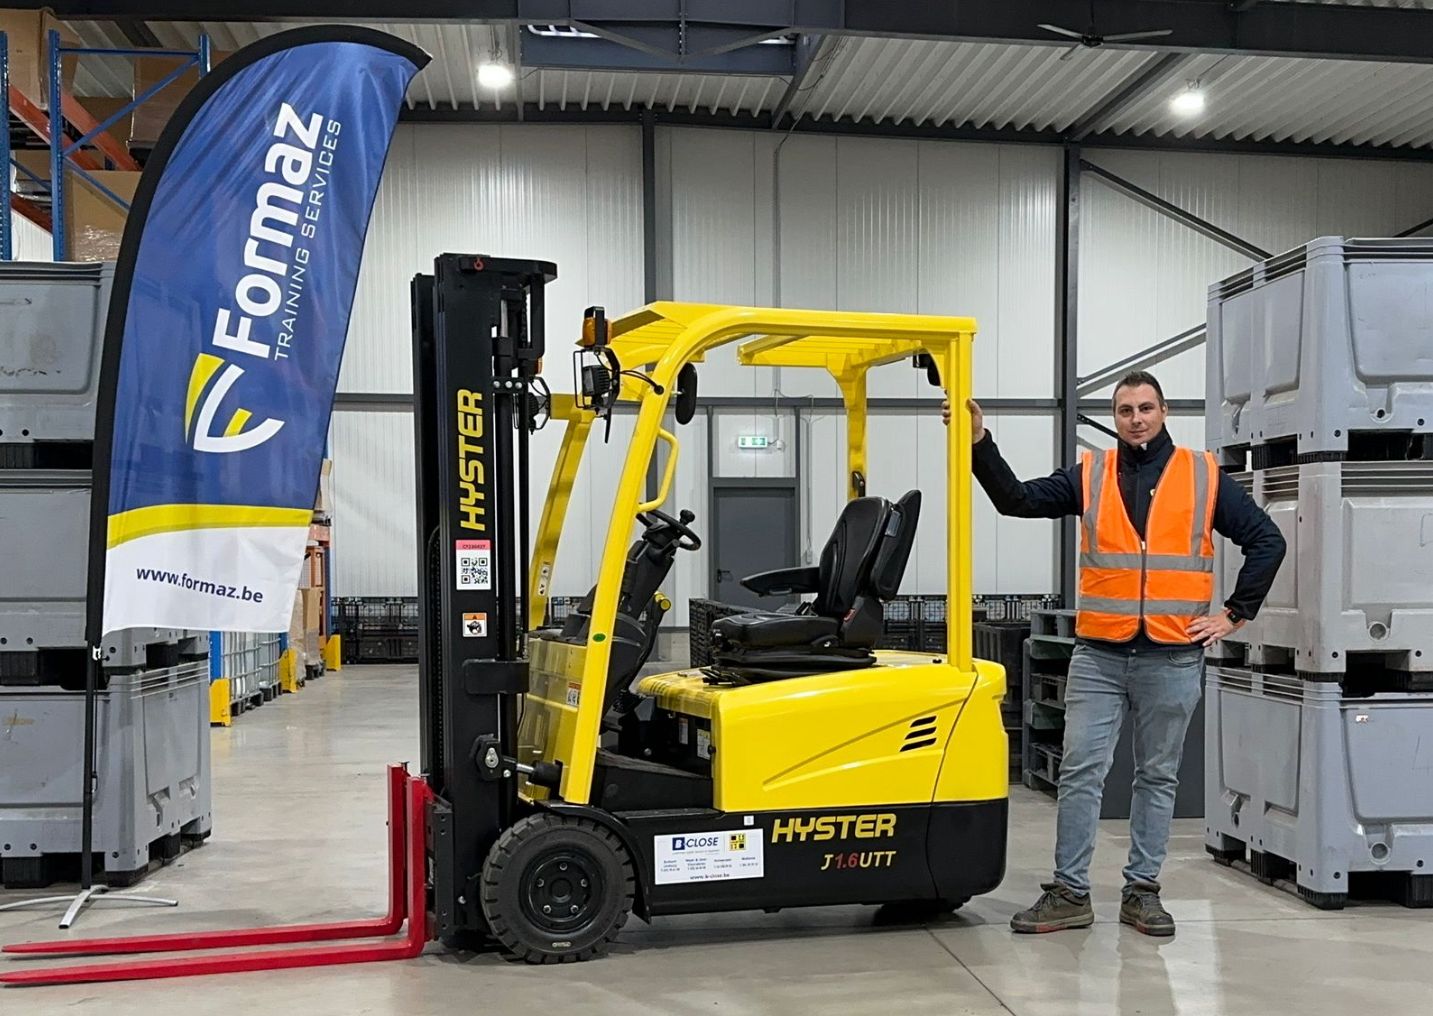 Our new forklift - Hyster